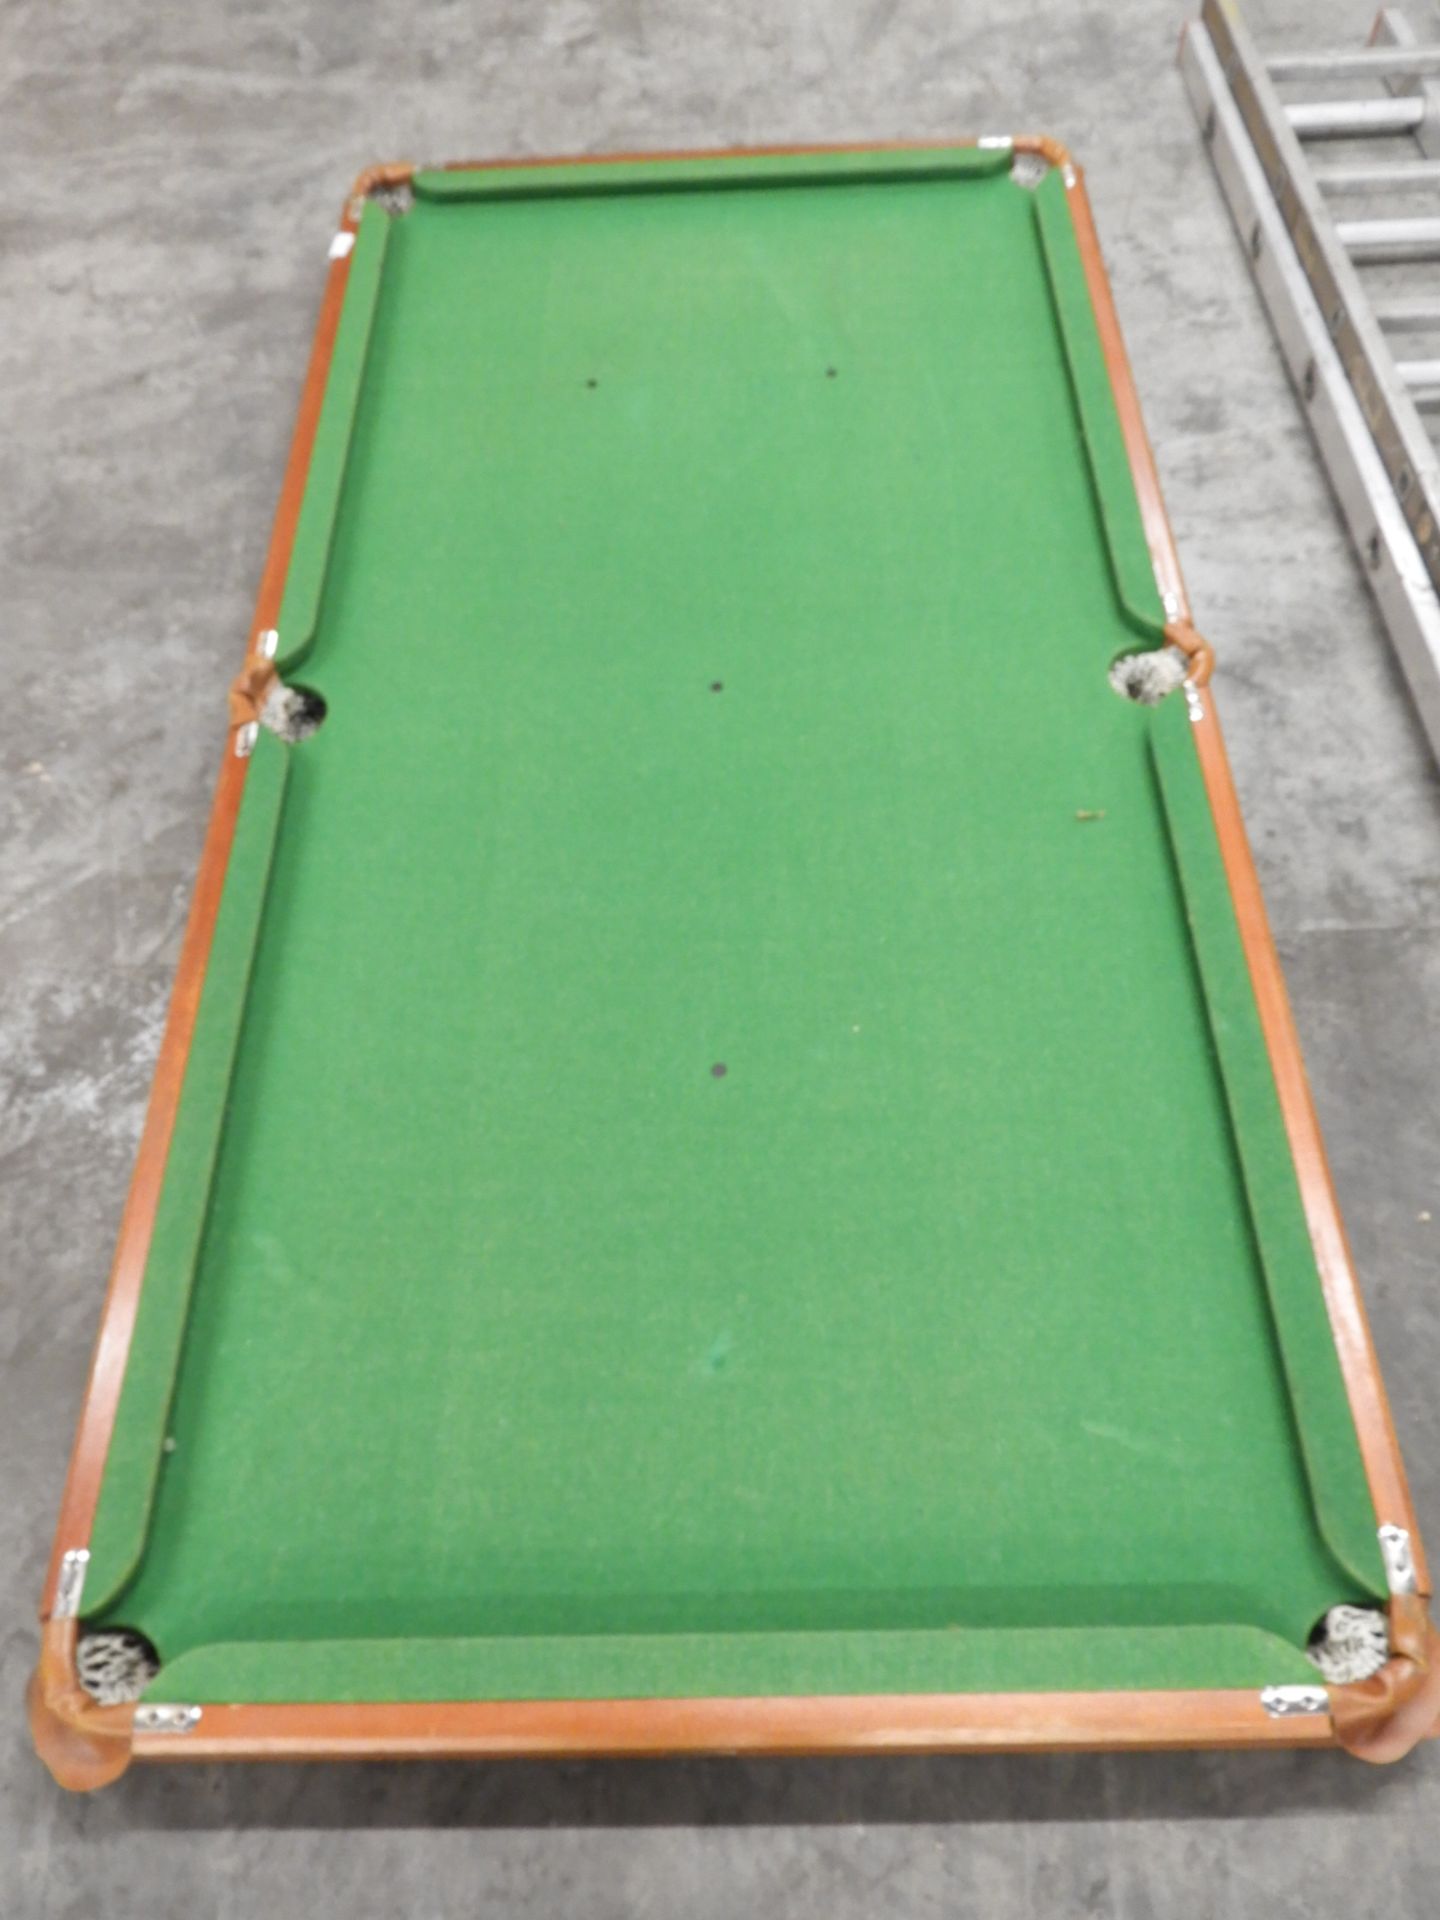 1/4 Size Snooker Table